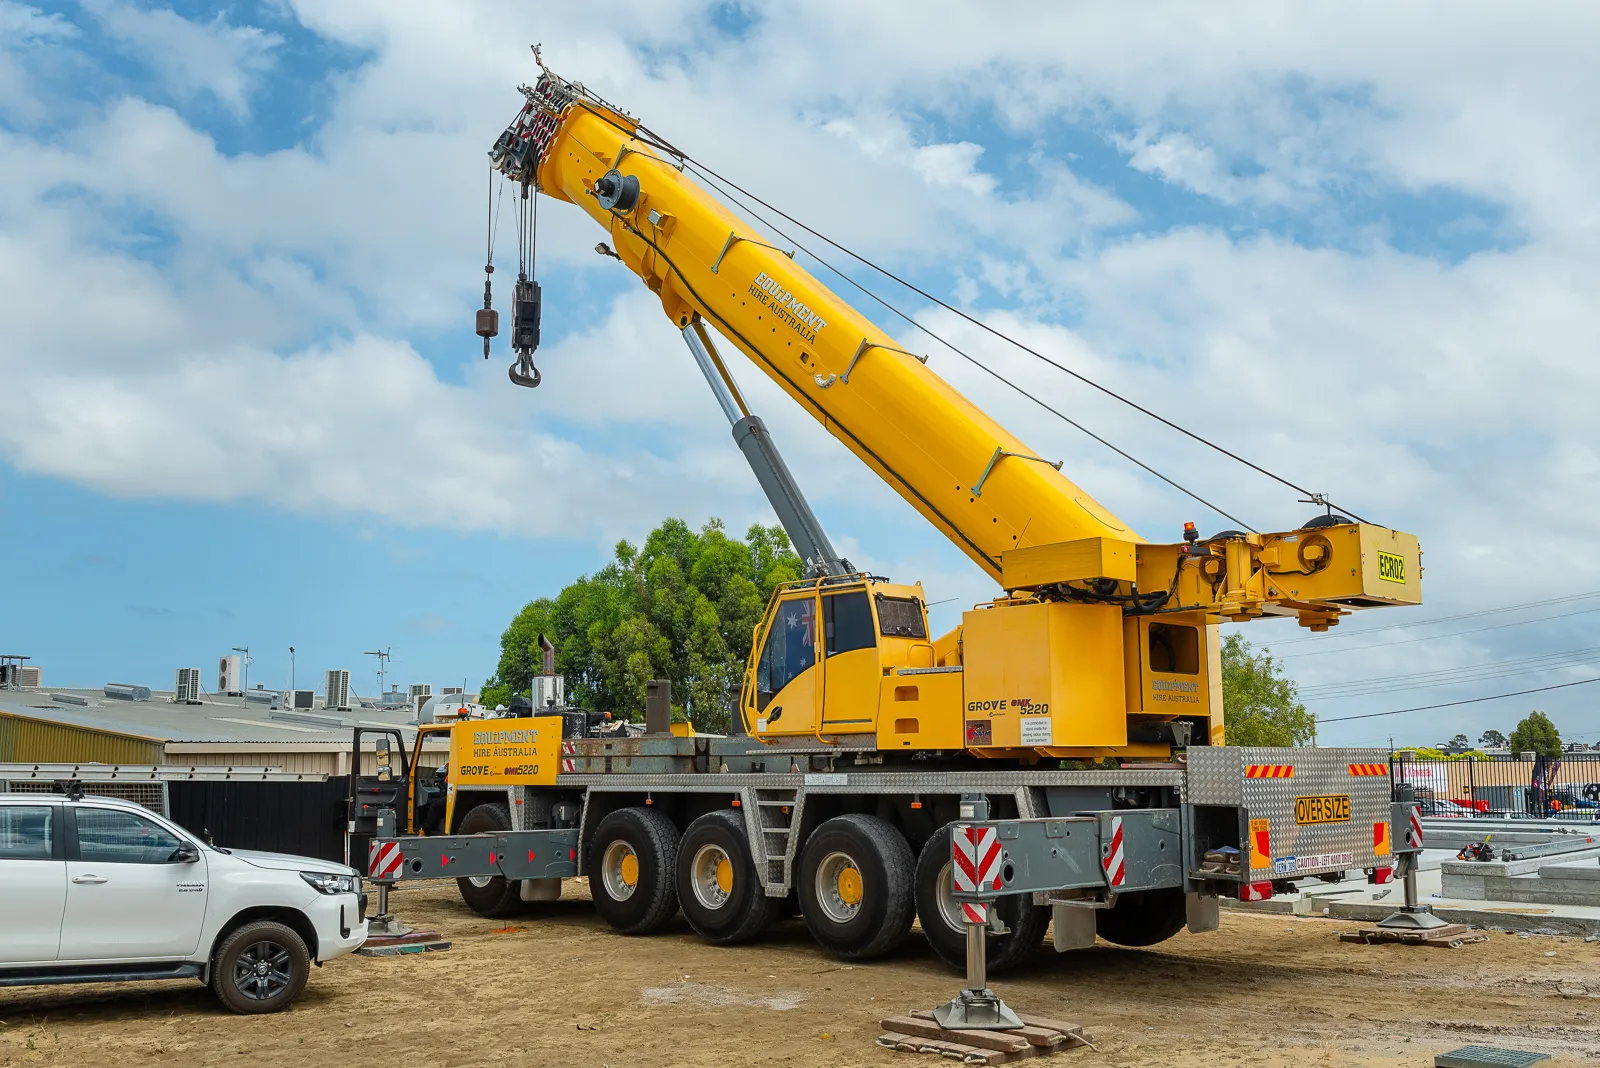 JD Rigging & Construction, Equipment Hire Australia  crane on a project erecting concrete panels and steel structures